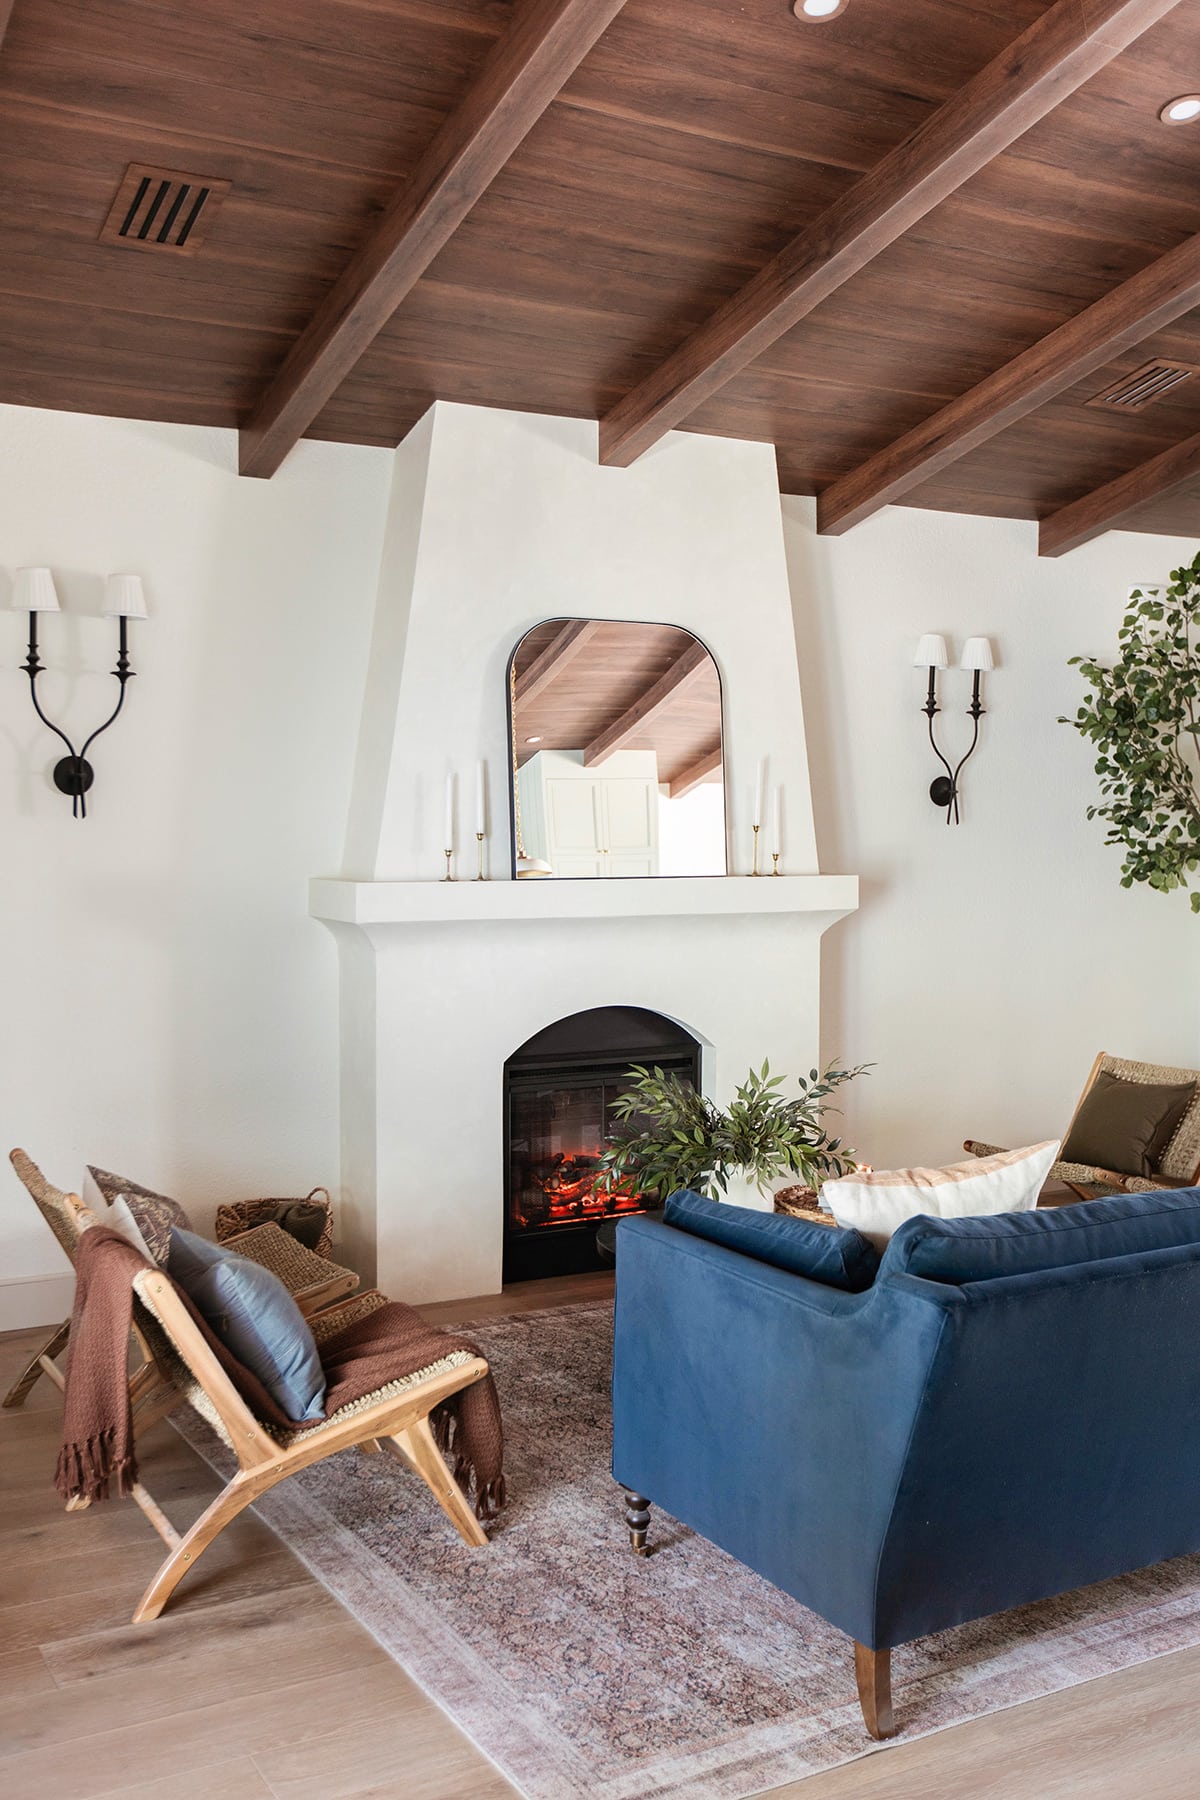 spanish style living room with diy electric fireplace, wood beam ceiling and sw alabaster walls